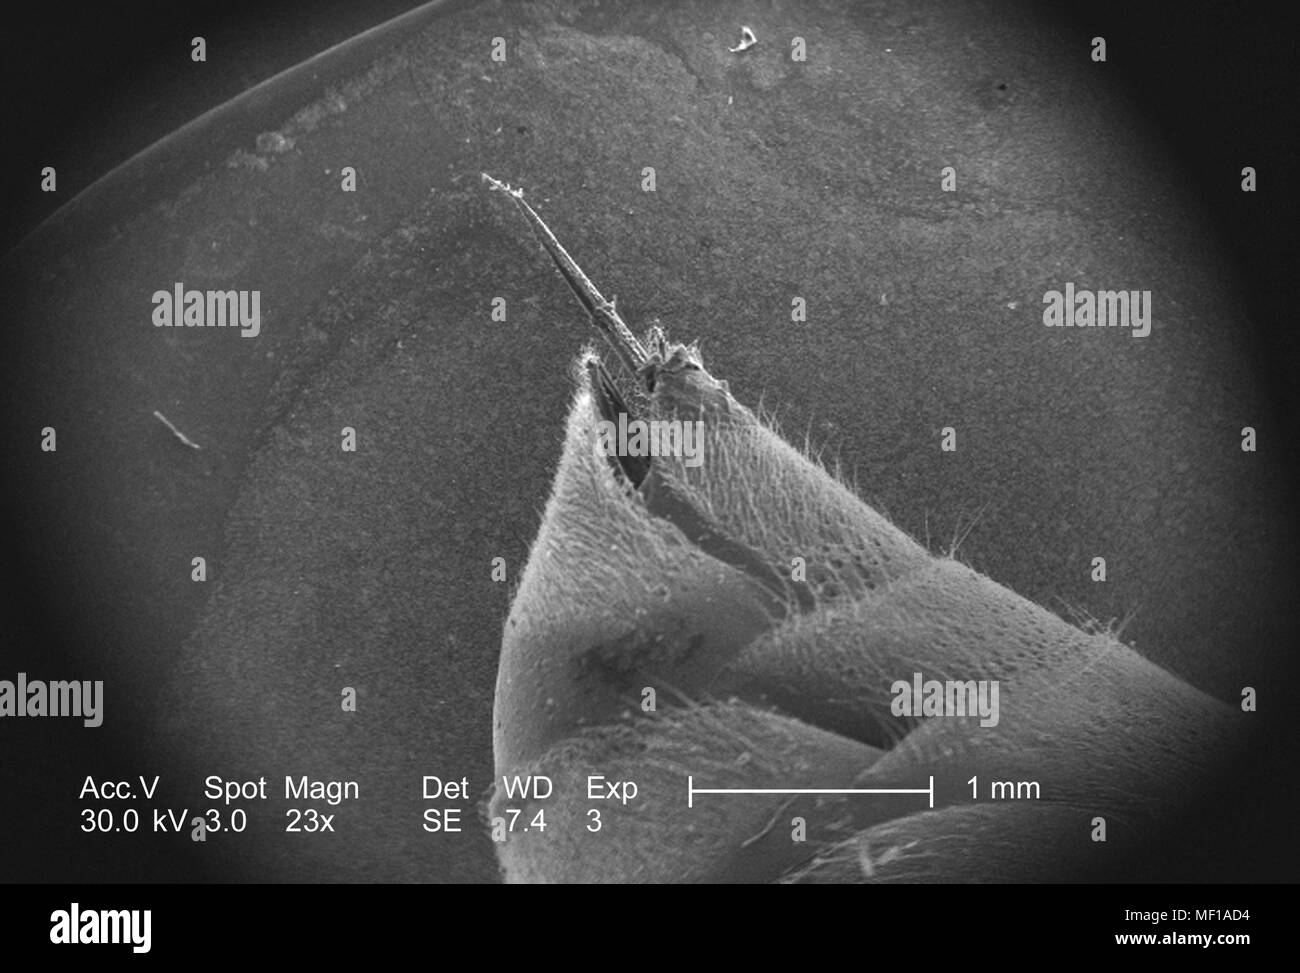 Ultrastructural morphologic details of an unidentified hymenopteran insect stinger apparatus, depicted in the 23x magnified scanning electron microscopic (SEM) image, 2005. Image courtesy Centers for Disease Control (CDC) / Janice Haney Carr. () Stock Photo